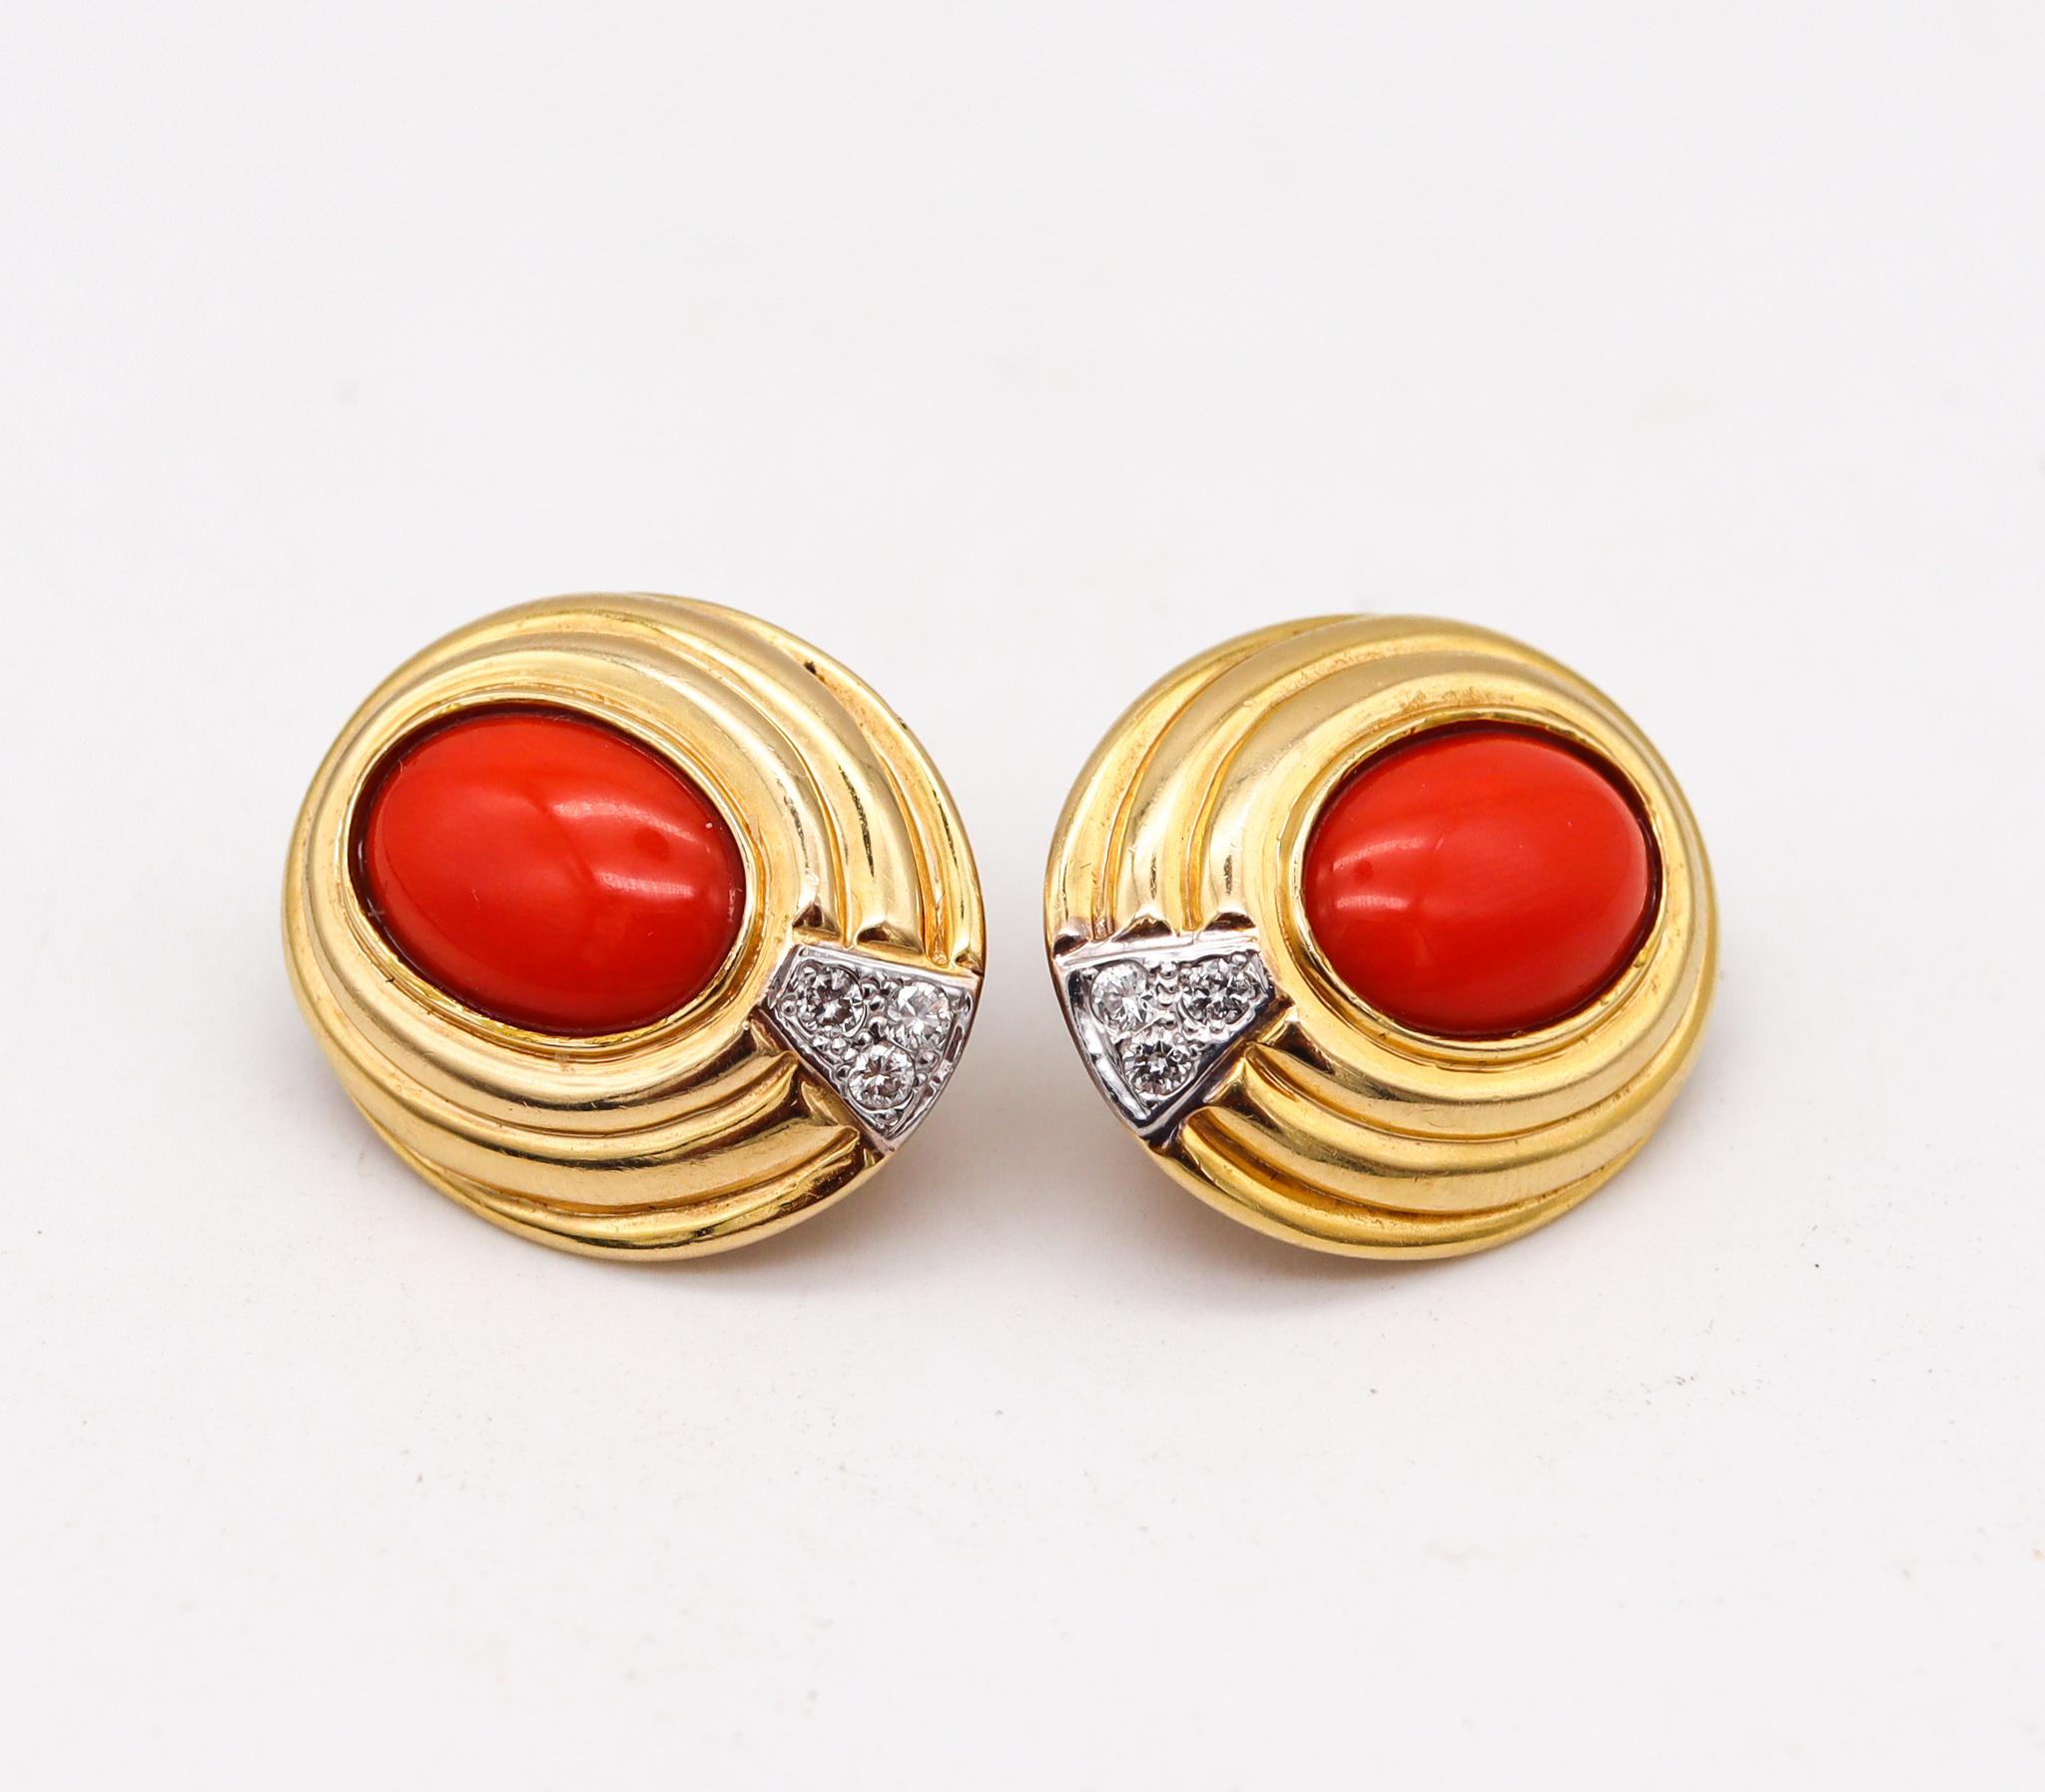 Italian modernism earrings with Coral.

Beautiful classic pair, created in Napoles Italy, back in the 1970's. These earrings has been crafted with classic revival patterns in solid yellow gold of 18 karats with high polished finish. Fitted with